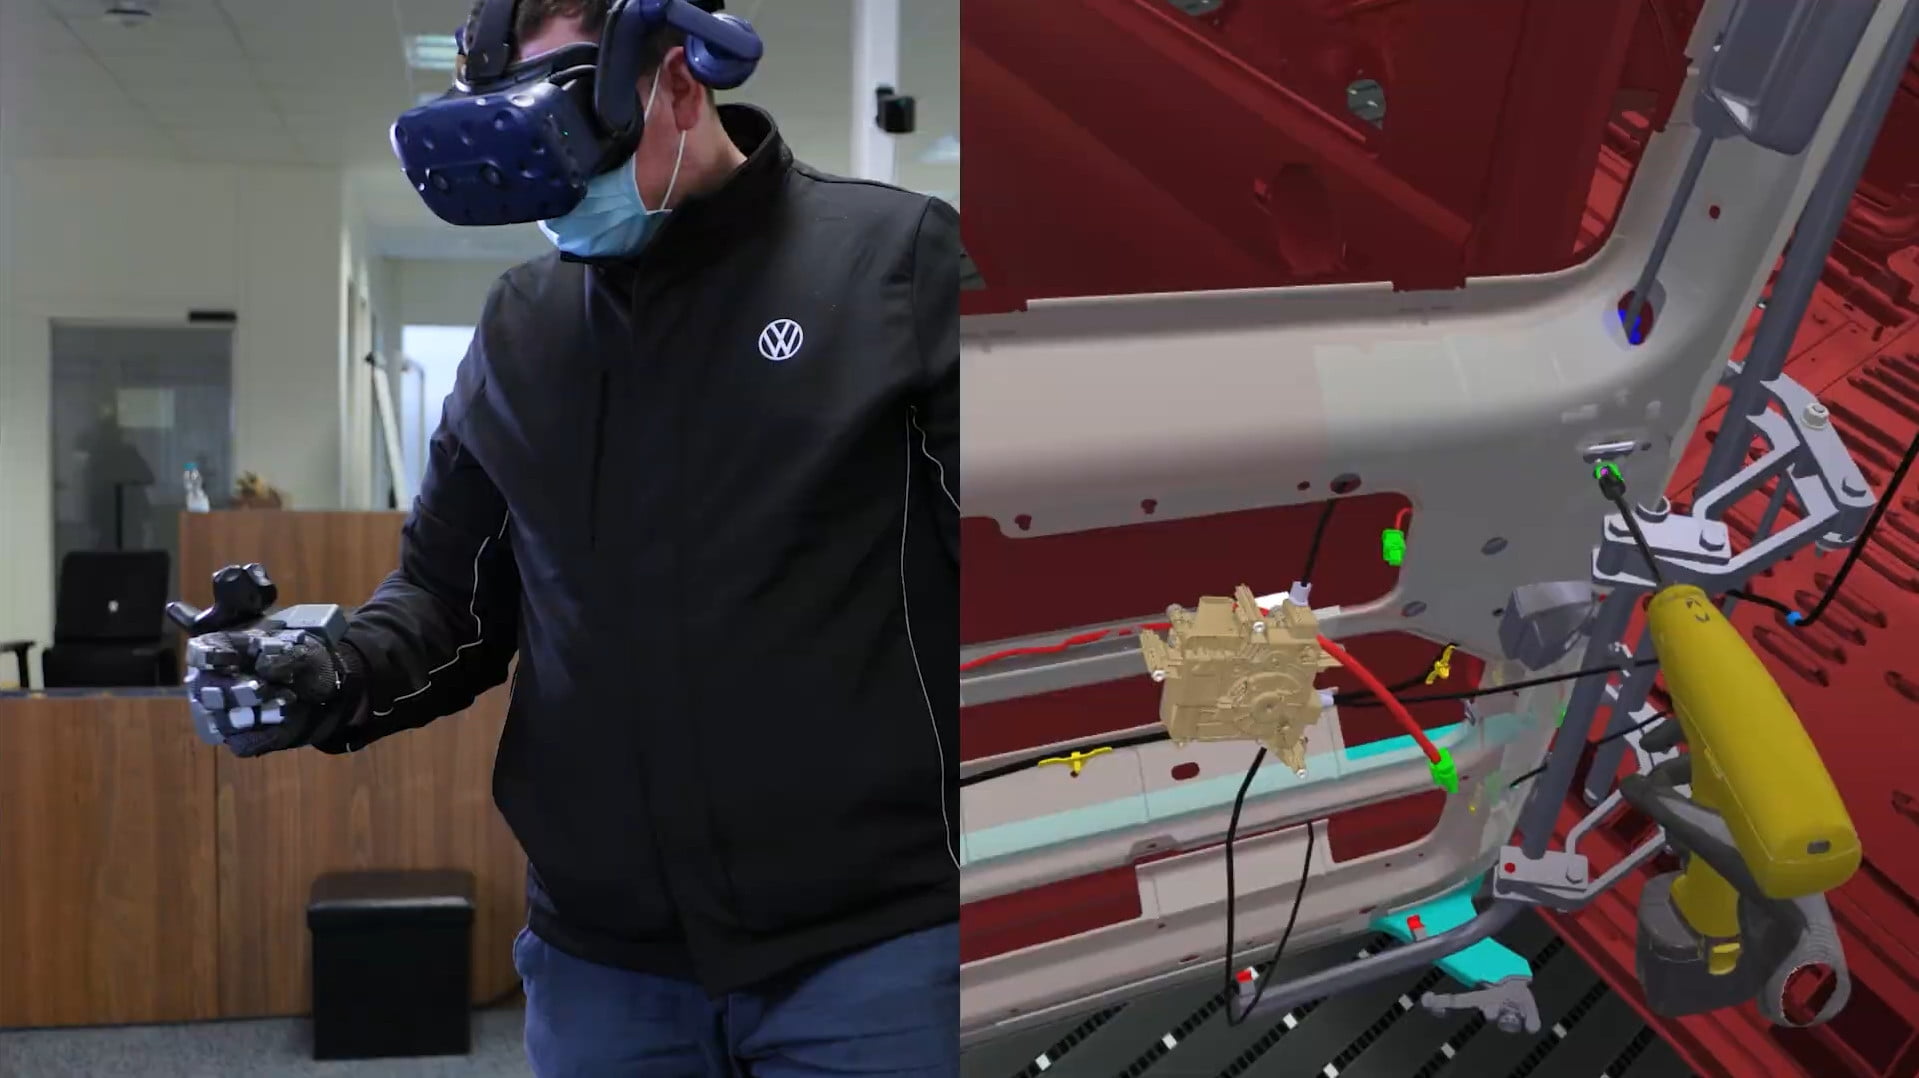 VW tests virtual reality assembly training with VR gloves